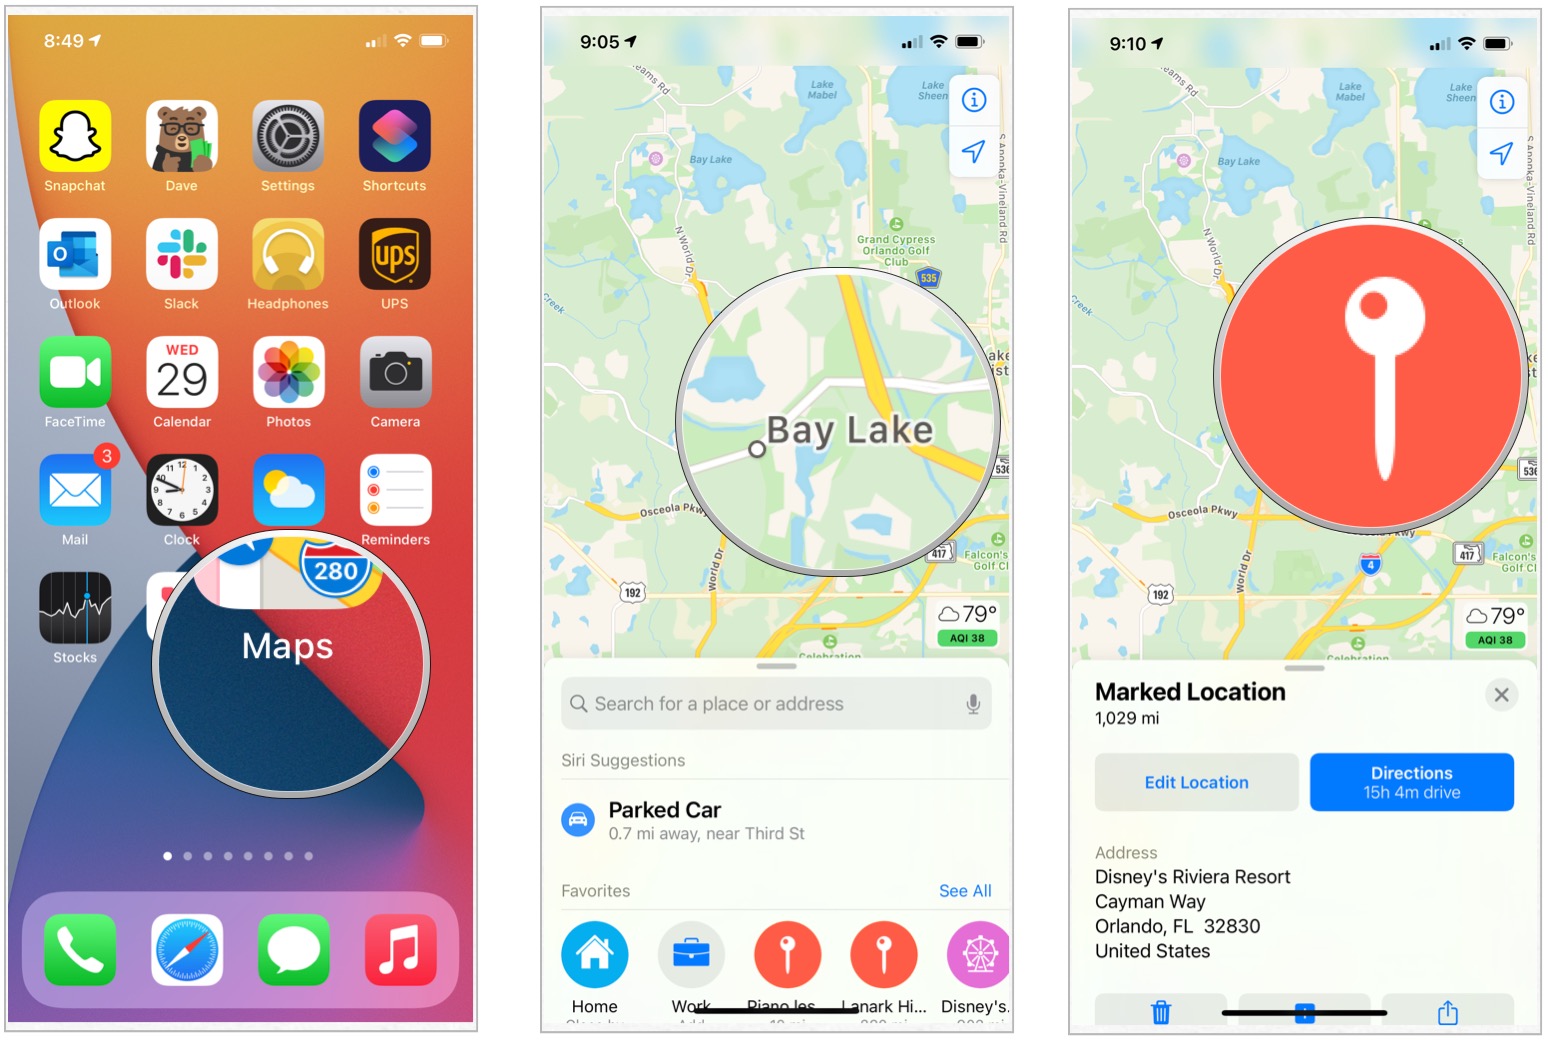 To drop a pin in Apple Maps, tap and hold on a location. It's that simple!